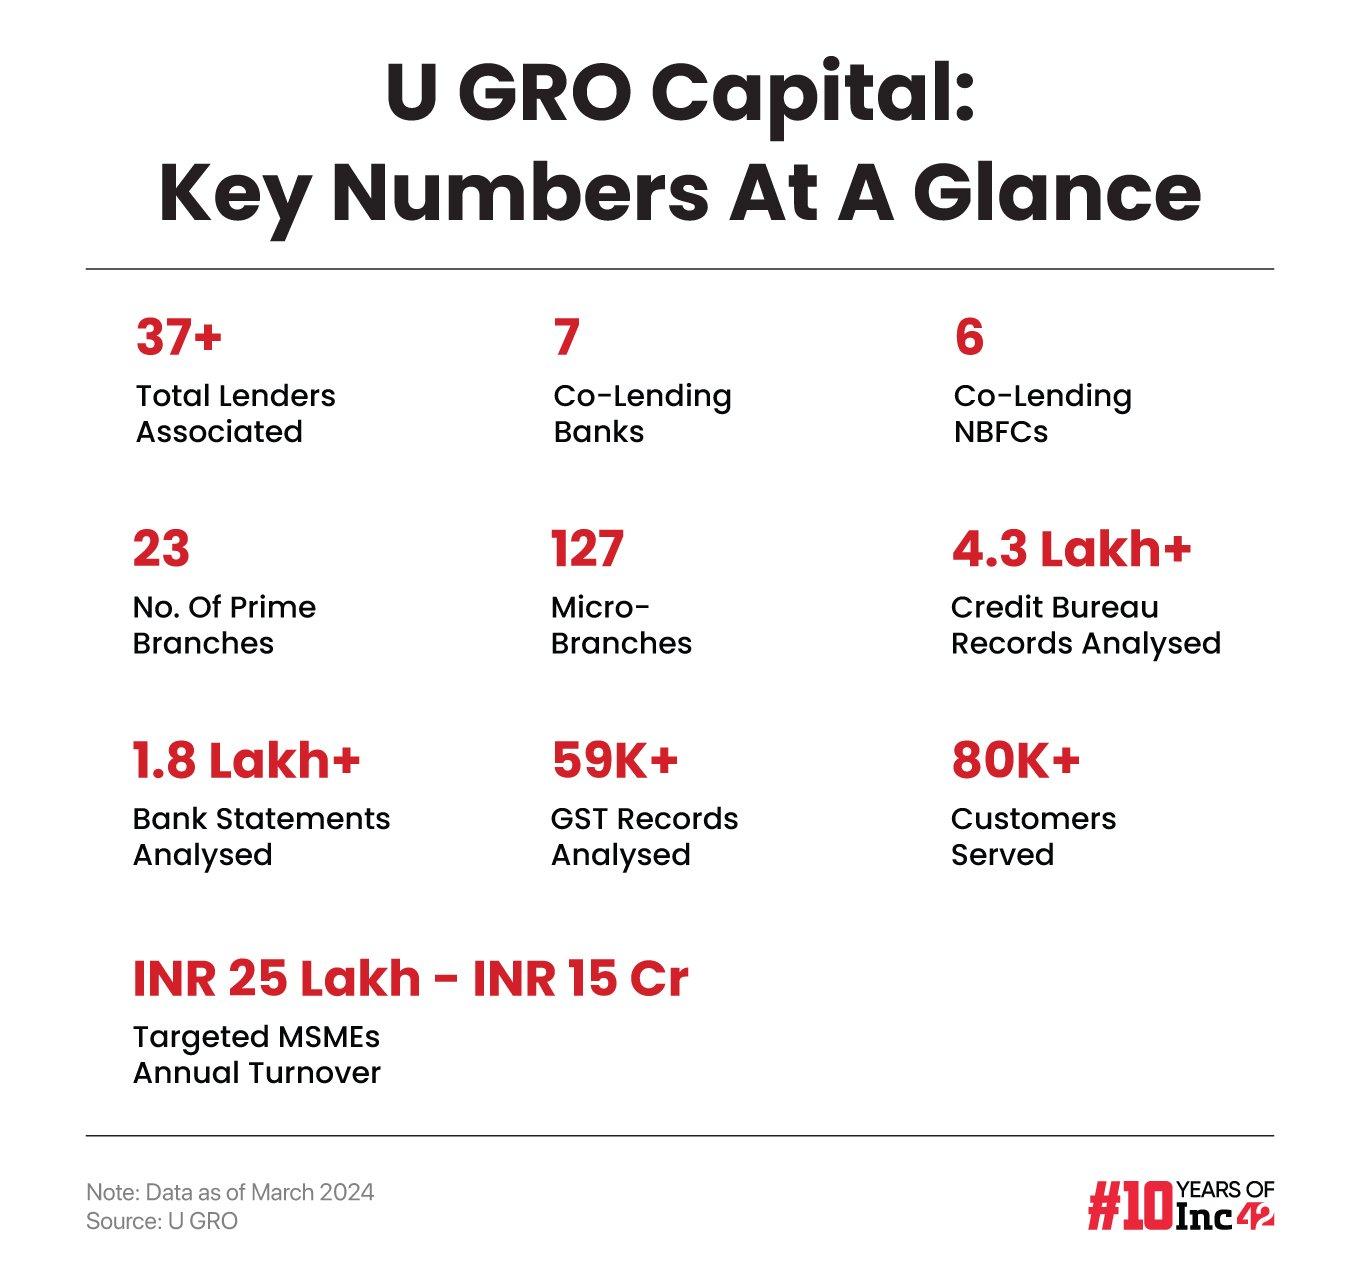 Set up in 2018 through the acquisition, recapitalisation and rebranding of the listed entity Chokhani Securities, U GRO took an unconventional route